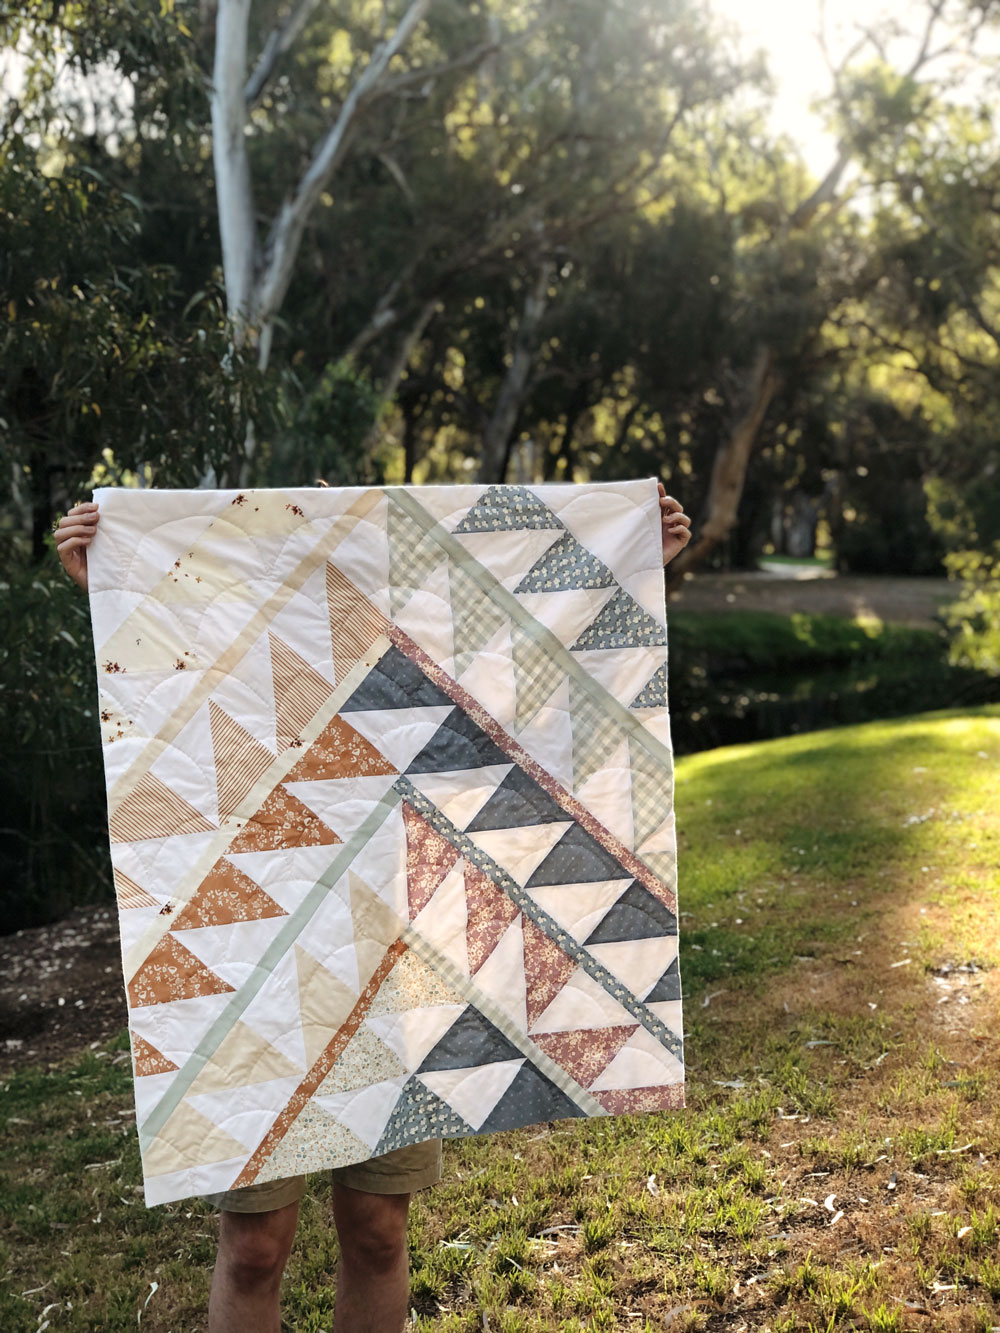 Gather is an HST modern quilt pattern with a unique twist! This instant PDF download comes in queen, twin, throw and baby quilt sizes. suzyquilts.com #quilt